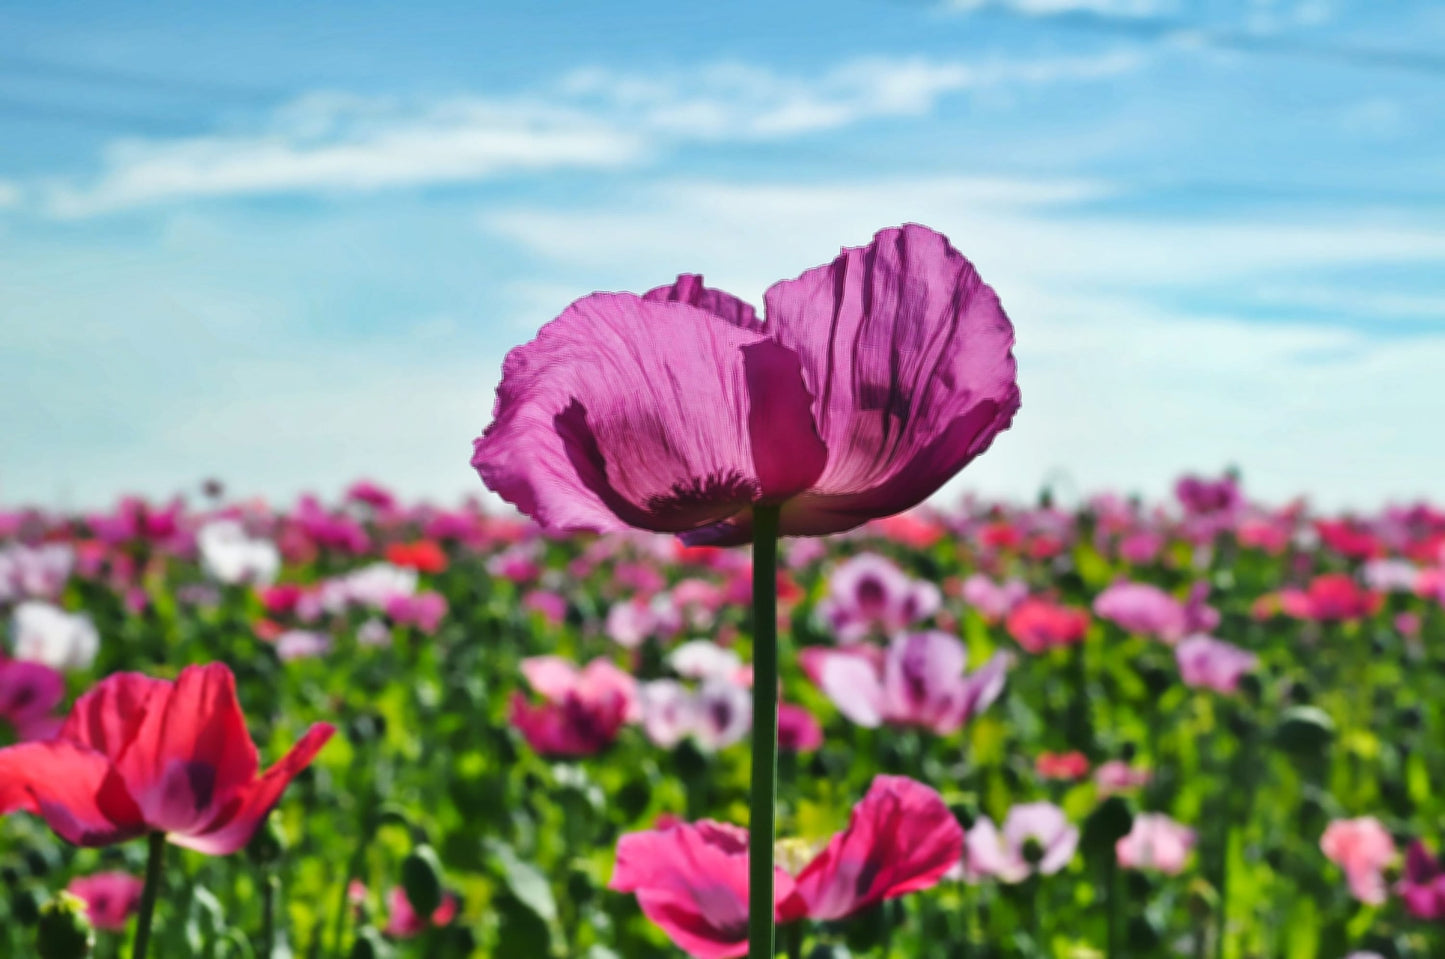 250 AFGHAN Blue POPPY Mixed Colors Papaver Somniferum Pink Purple White Flower Seeds